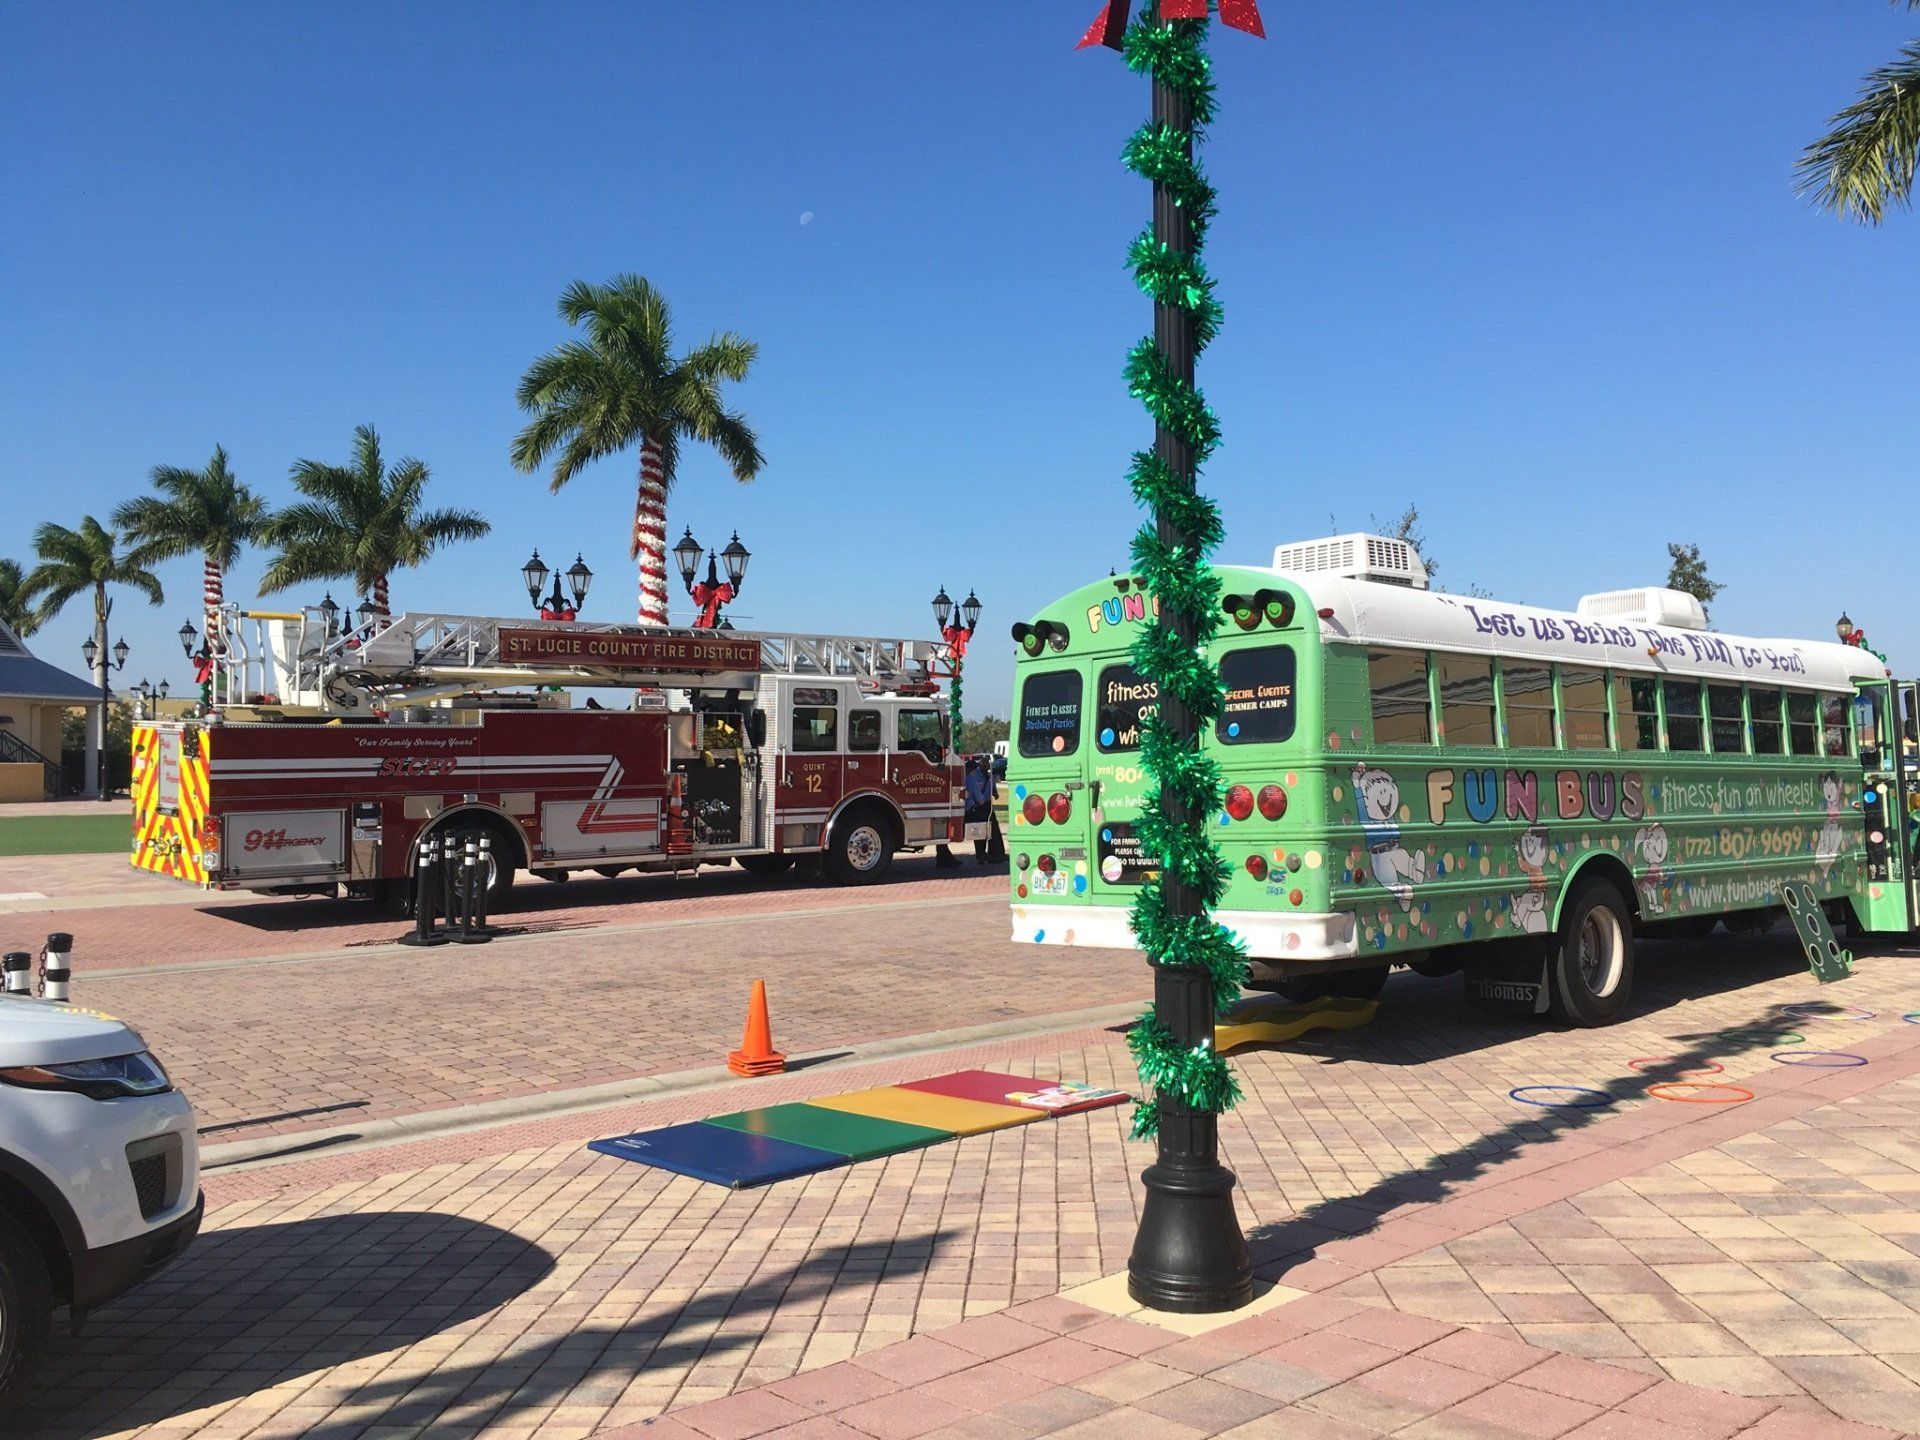 The Fun Bus and the St. Lucie County Fire Engine Outside of The Buddy Bear® Den Entrance